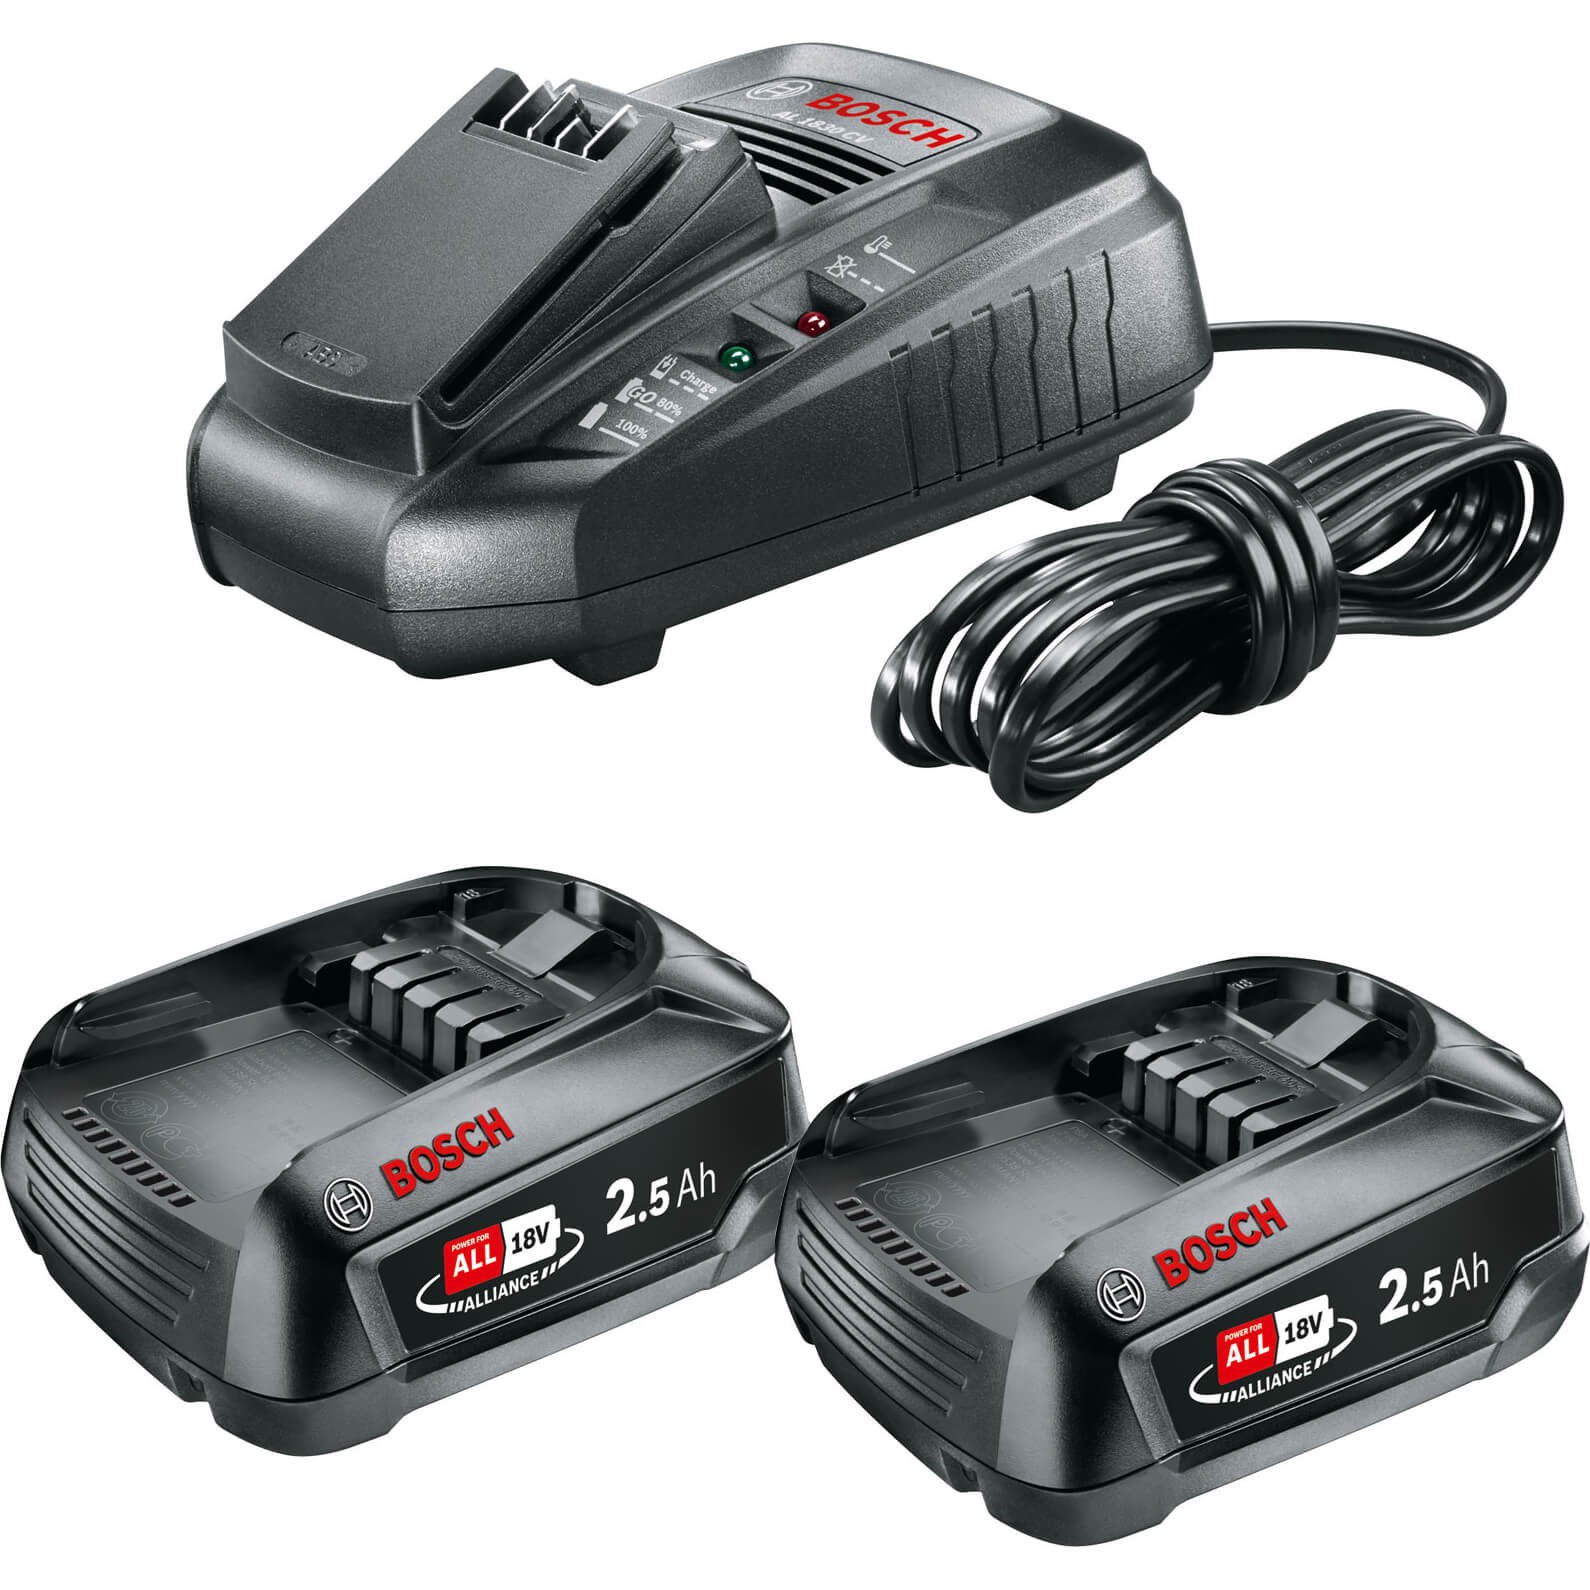 Bosch GREEN 18v Cordless Twin Battery 2.5ah and 3A Fast Charger | Battery Chargers